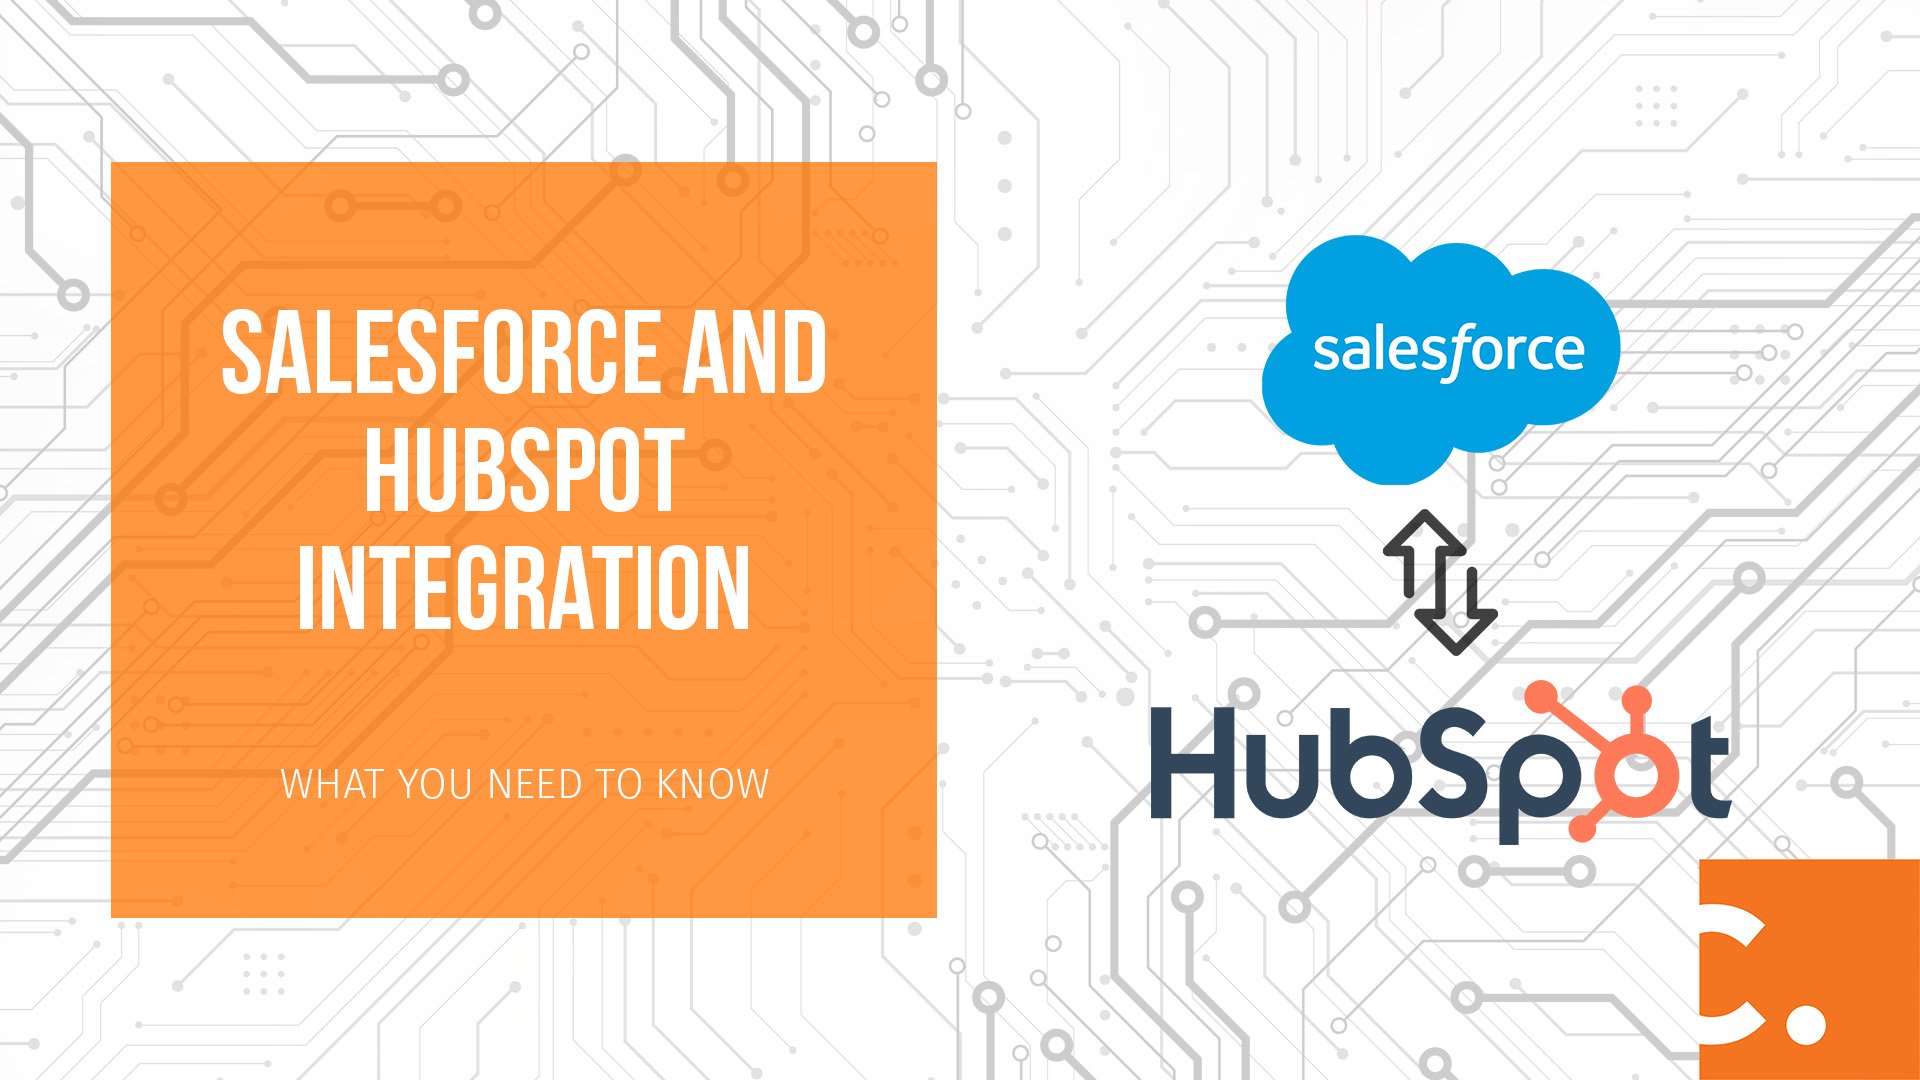 Salesforce and HubSpot Integration: What You Need to Know